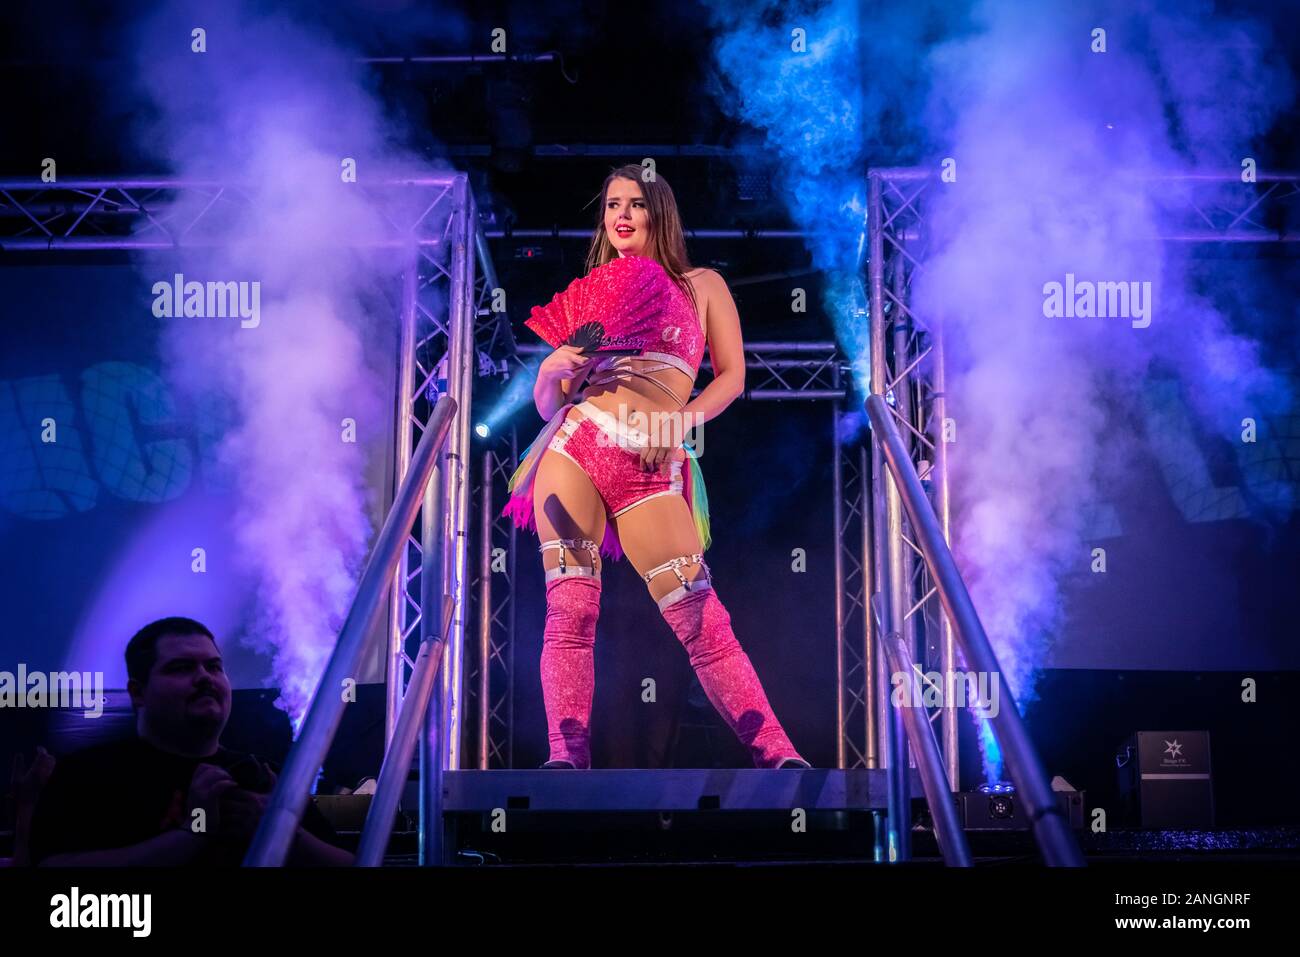 Zoe Lucas makes her entrance for “Wrestle Queendom 3” tournament at The Venue in west London by Pro-Wrestling: EVE, women's wrestling event. Stock Photo